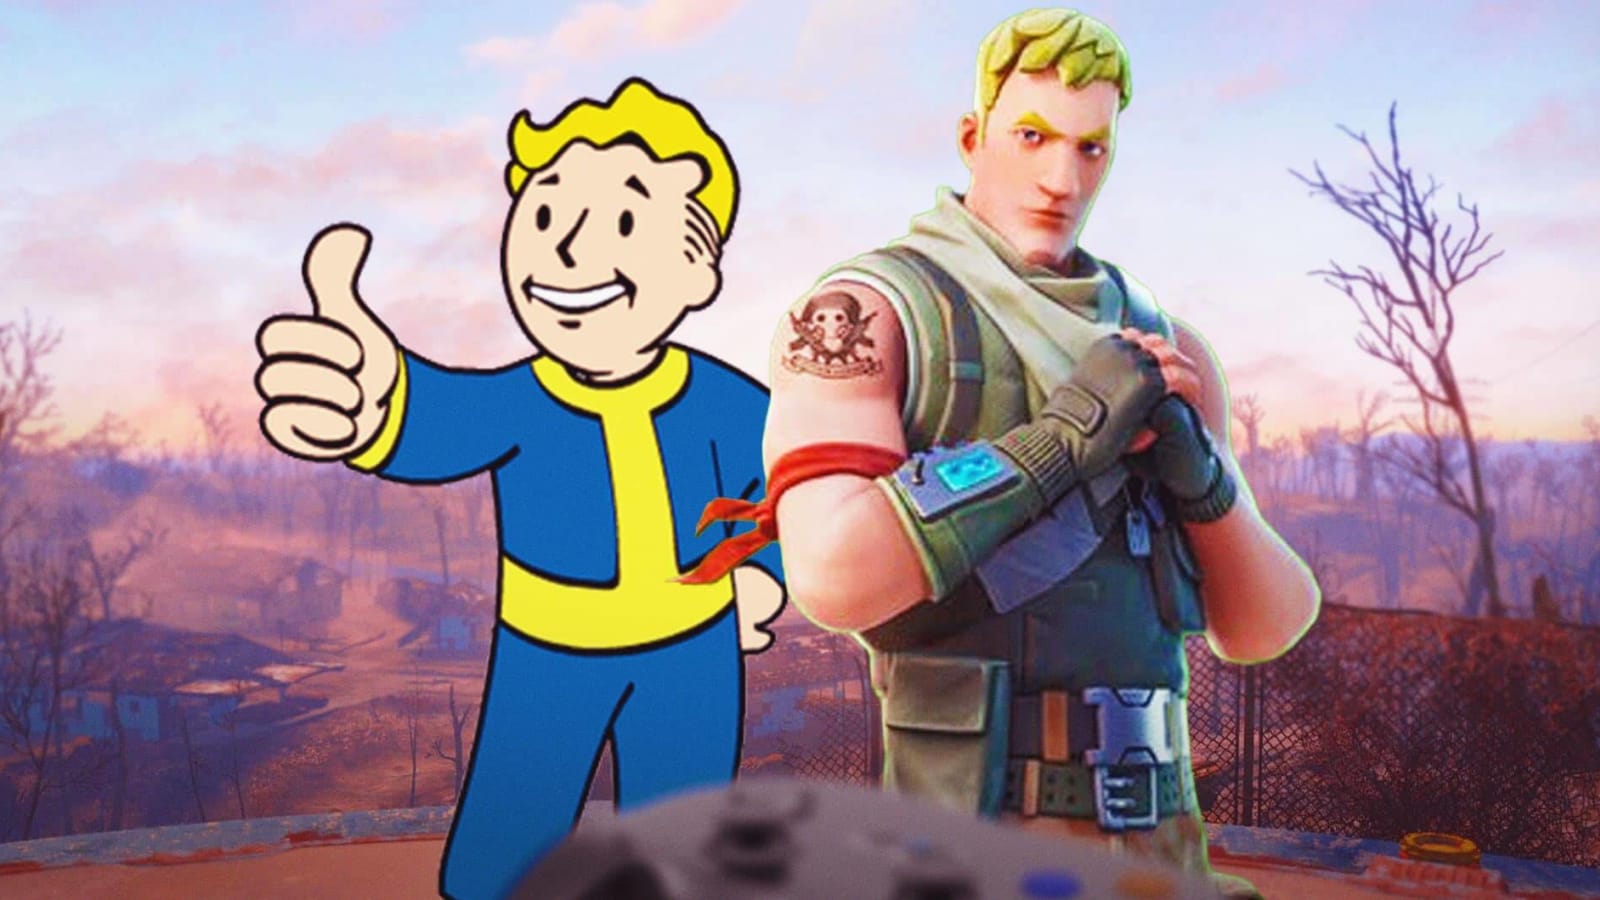 Epic Games Confirms Fortnite’s Collaboration with Fallout